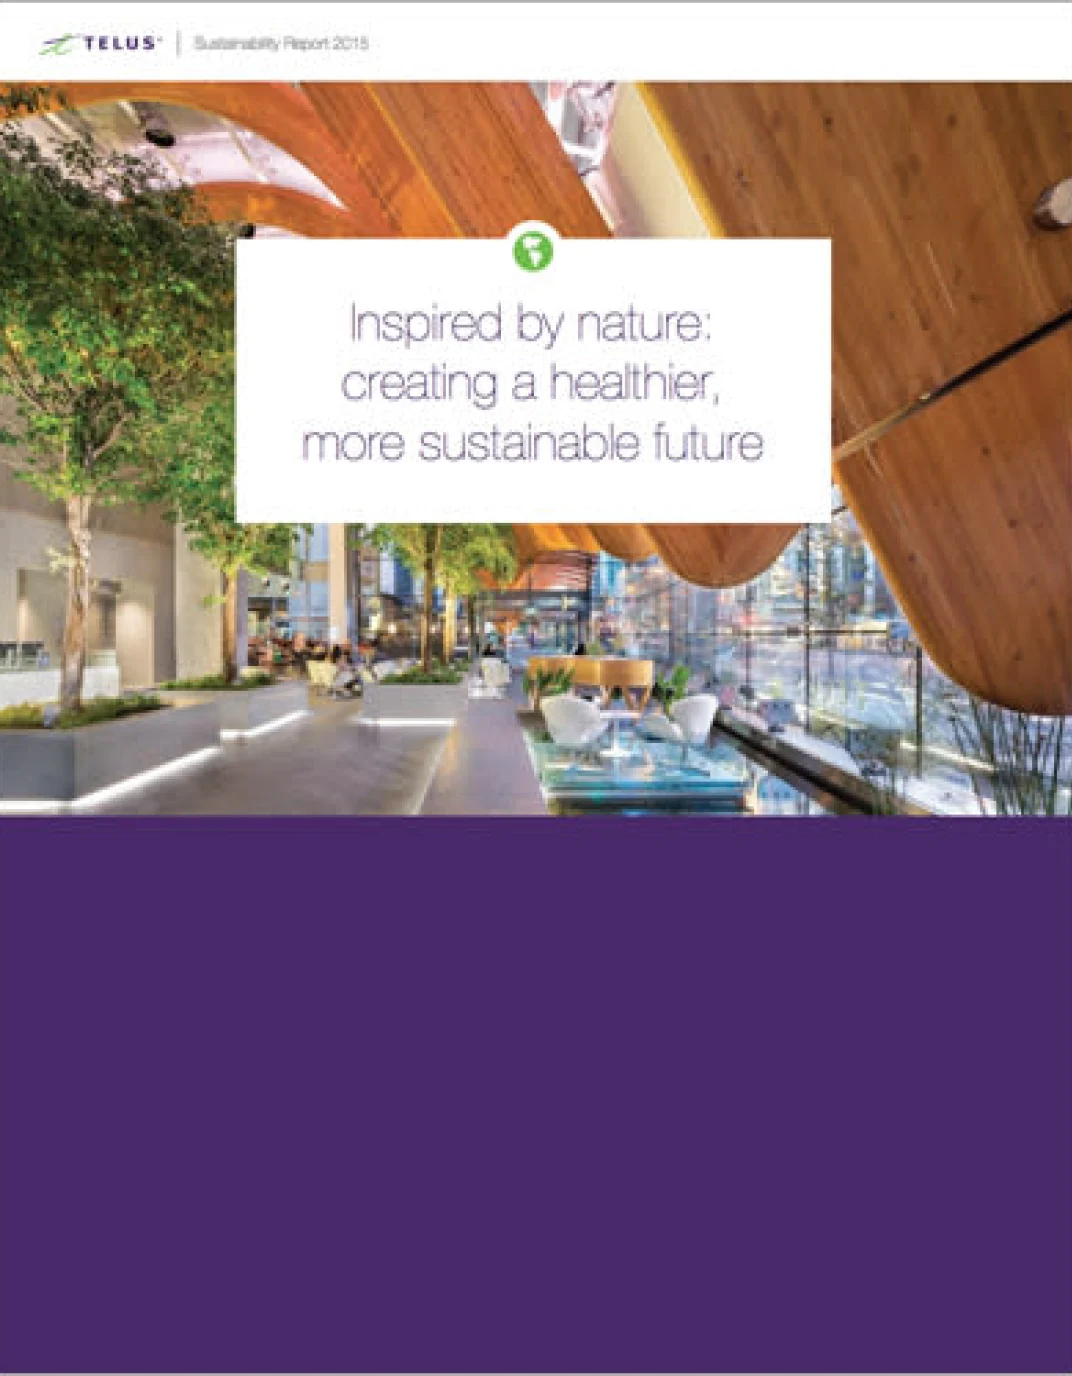 The cover of the 2015 TELUS Sustainability Report